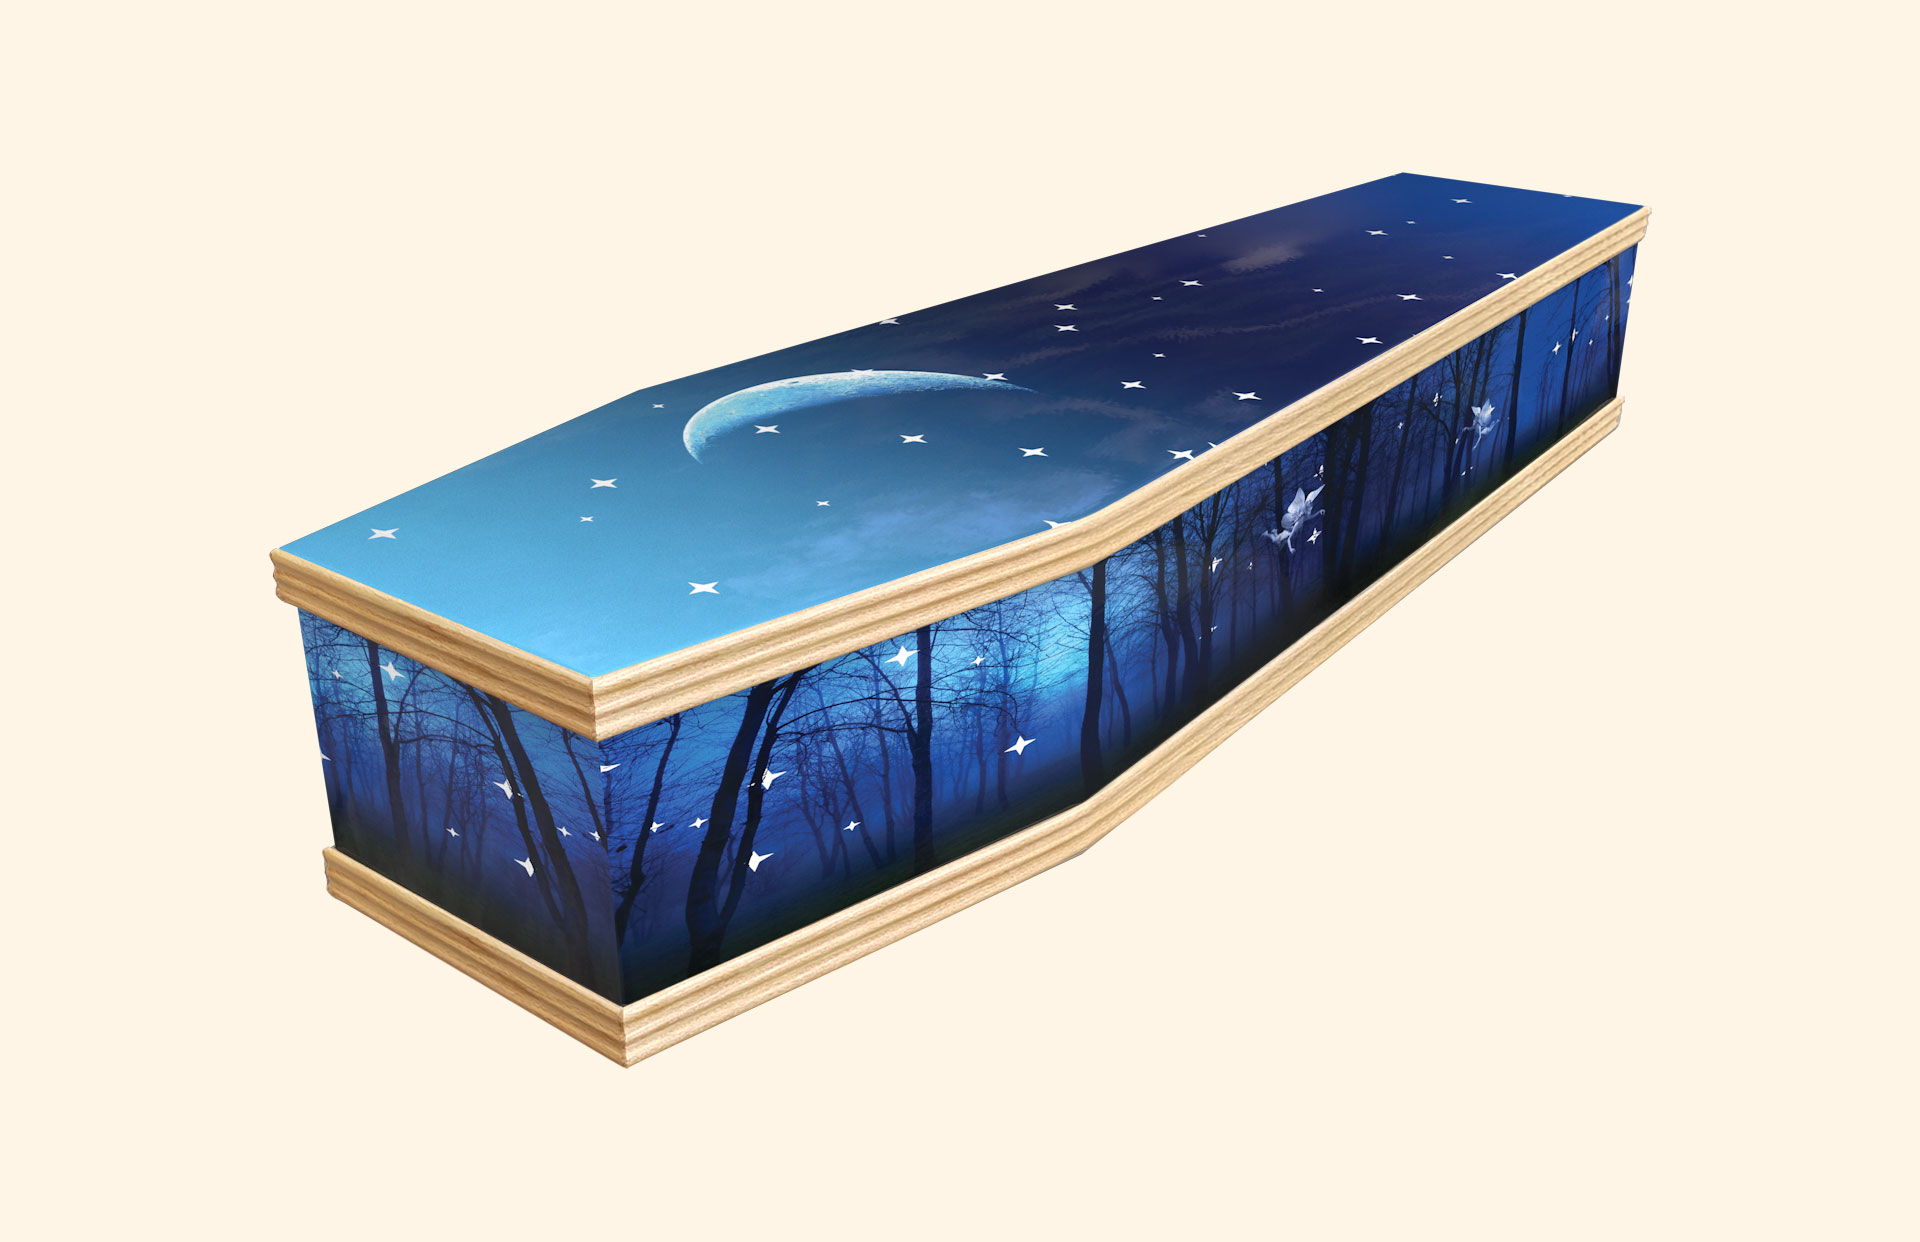 Moonlight Forest design on a classic coffin